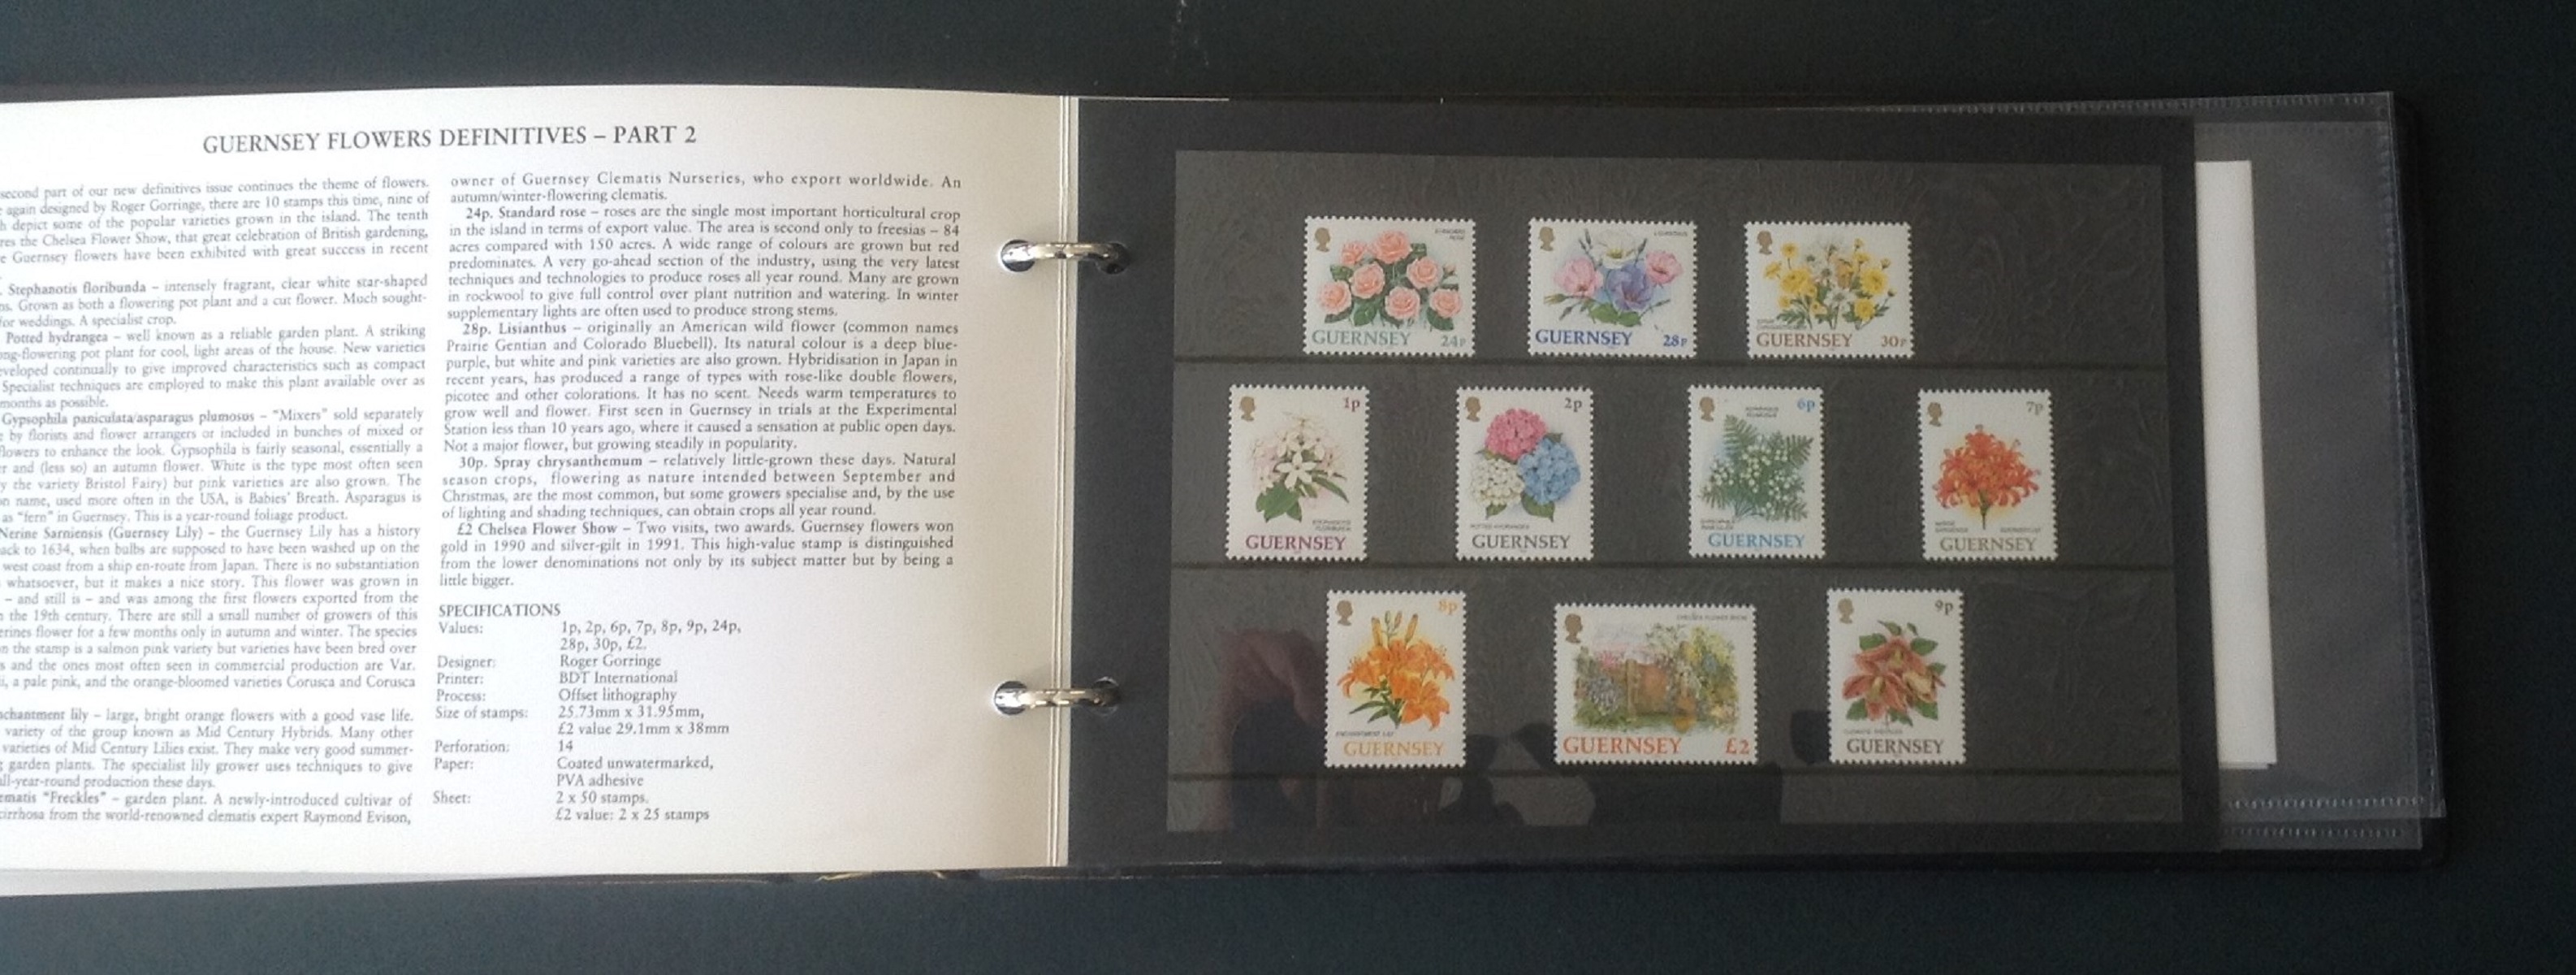 Guernsey flower collection album. Includes 2 presentation pack, 1993 flower definitives I and II. - Image 3 of 4